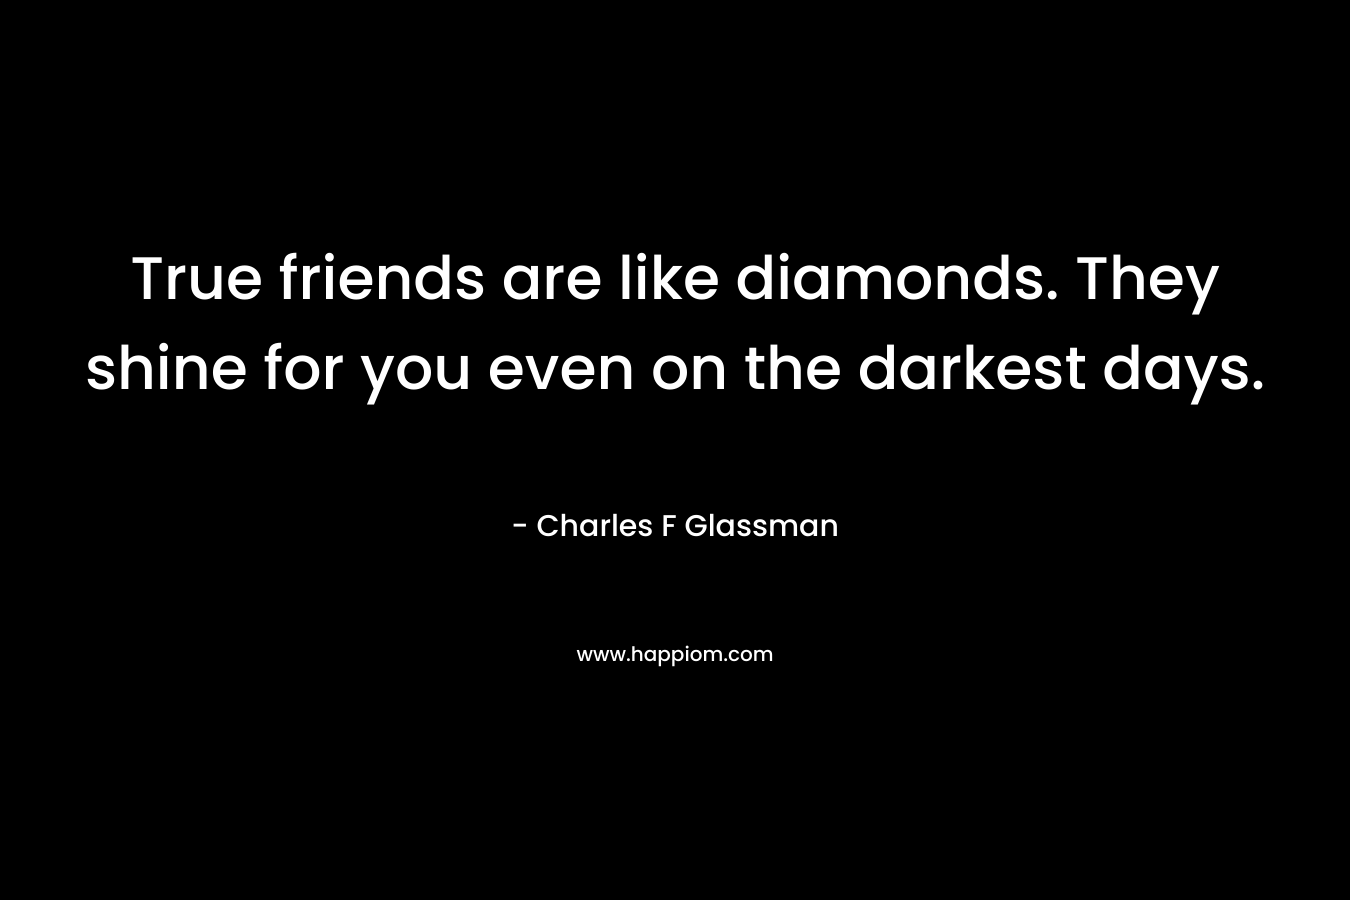 True friends are like diamonds. They shine for you even on the darkest days. – Charles F Glassman